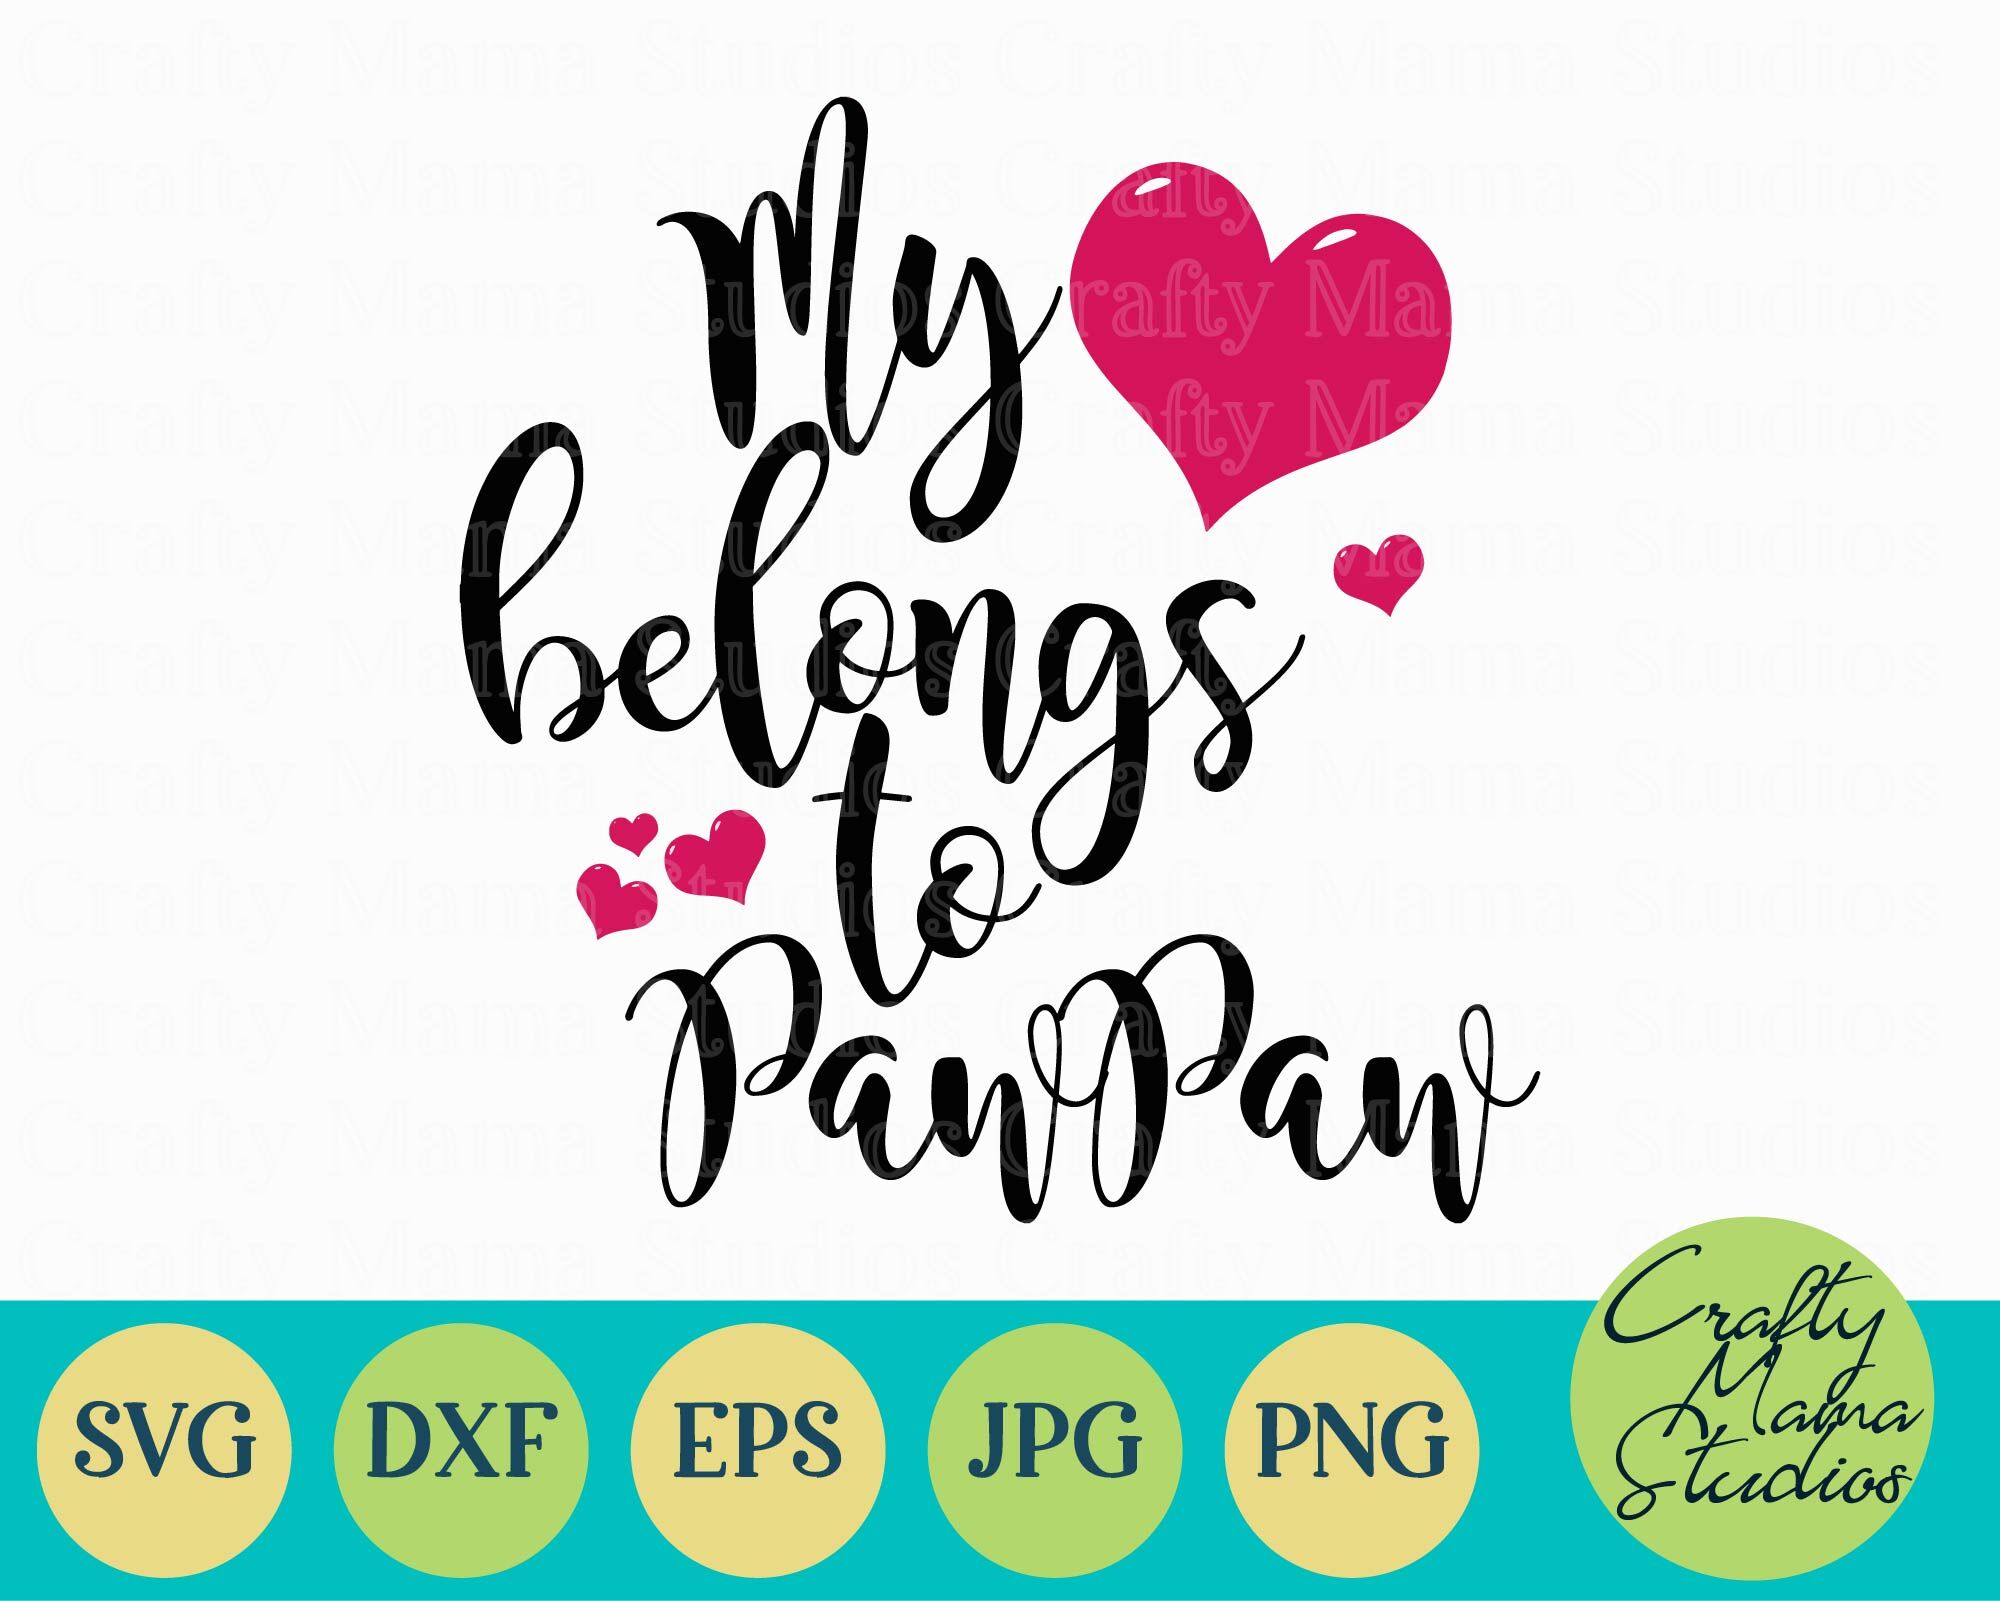 Free Free 200 Best Buckin Pawpaw Ever Svg SVG PNG EPS DXF File